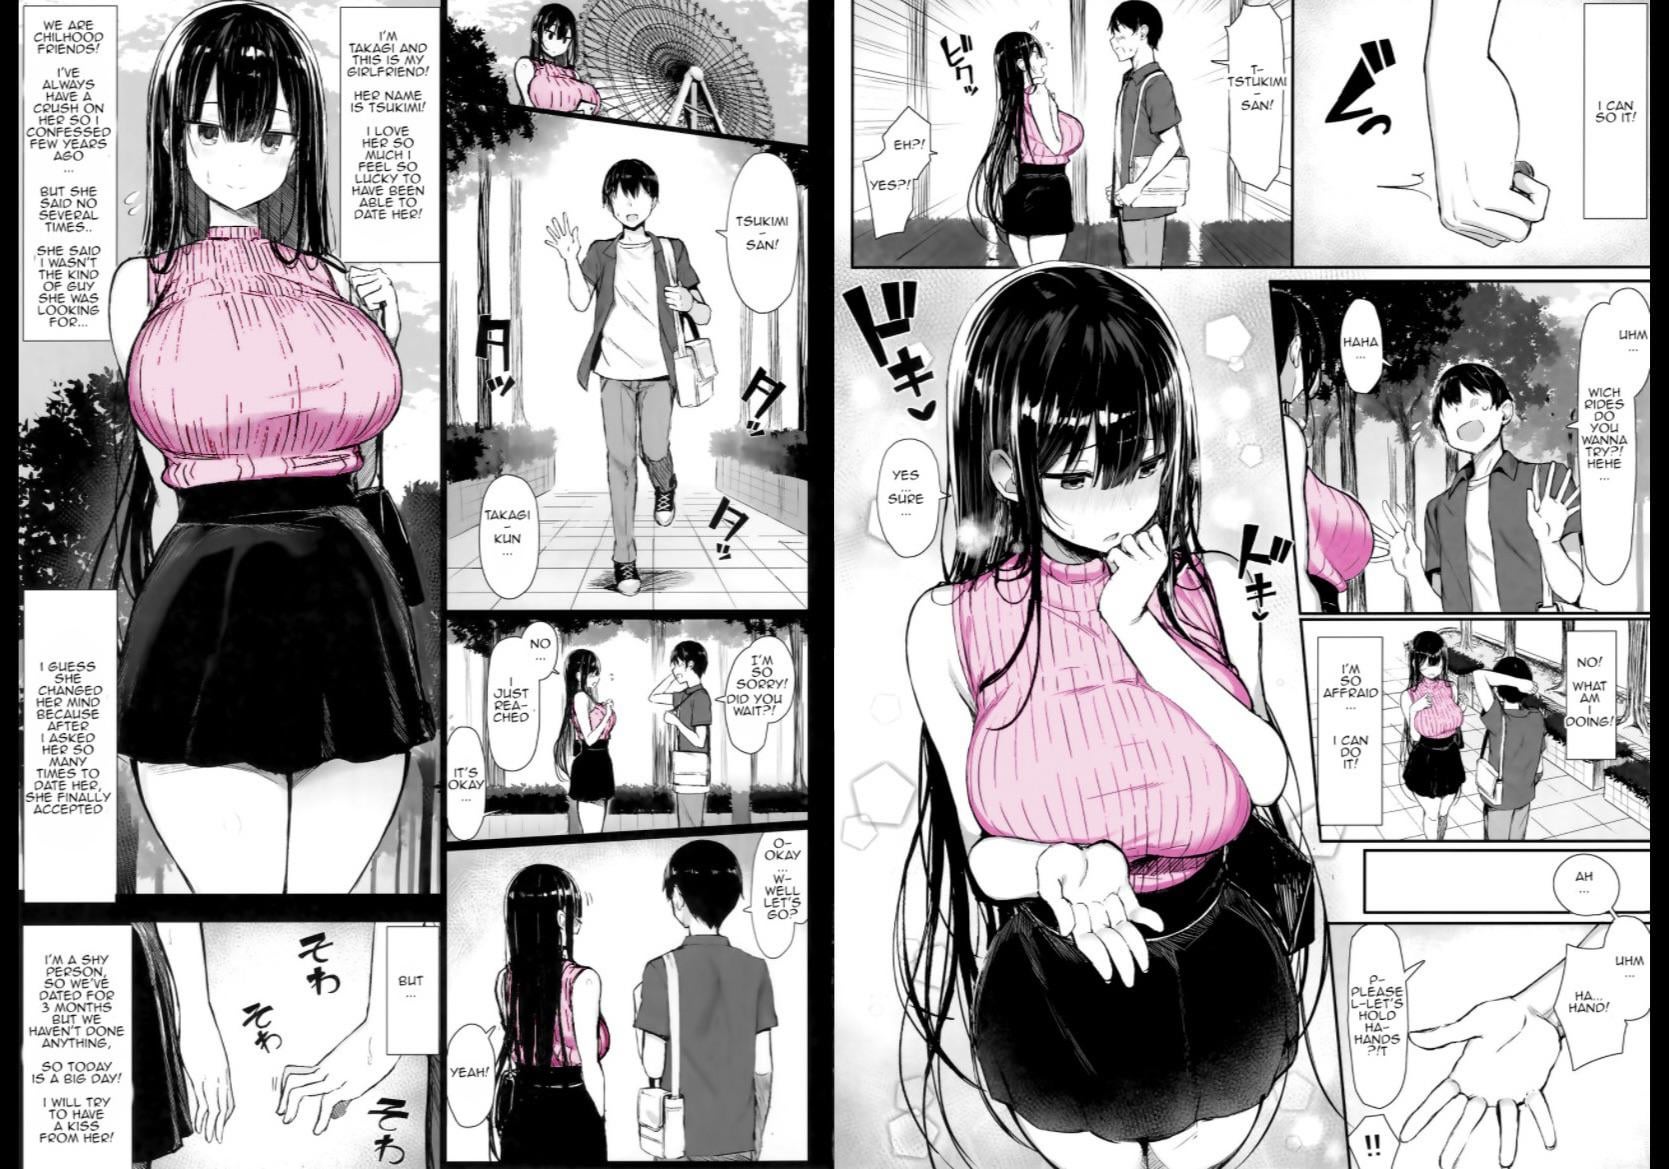 [MOSQUITONE] the pure girlfriend fall BLACKED 1-2 - Page 1